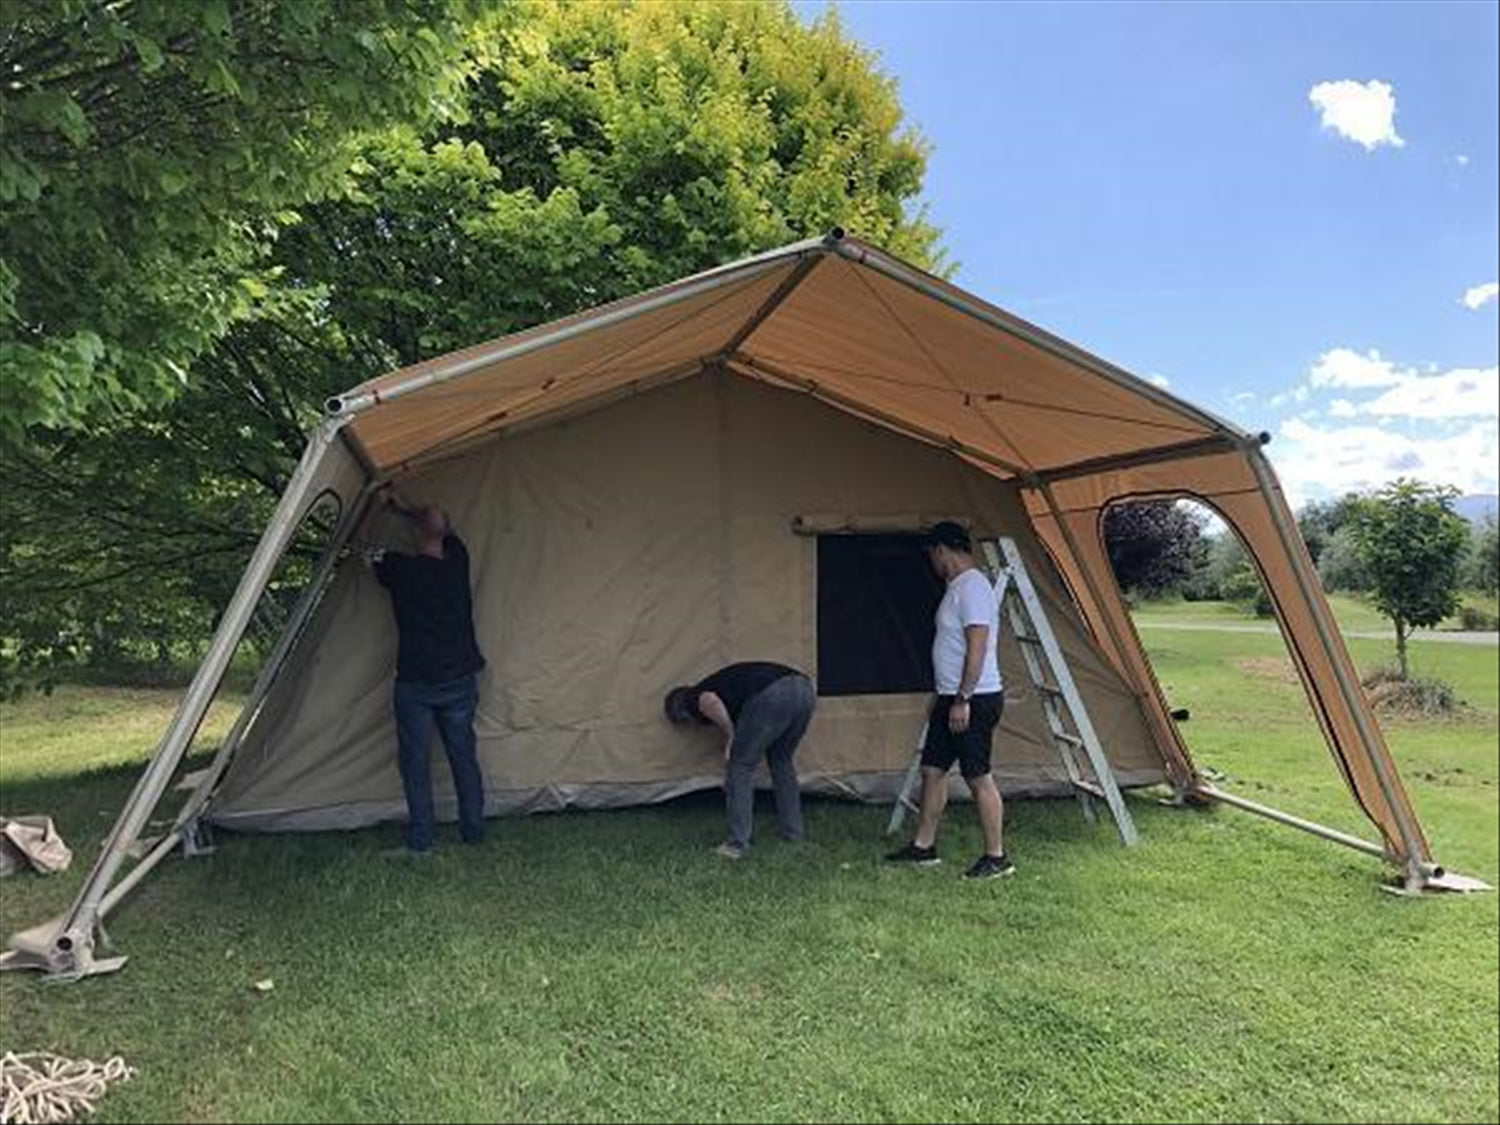 The Bach - 6x6m Glamping Tent, PVC Roof, Canvas Tent, Aluminium Frame, 210+kg